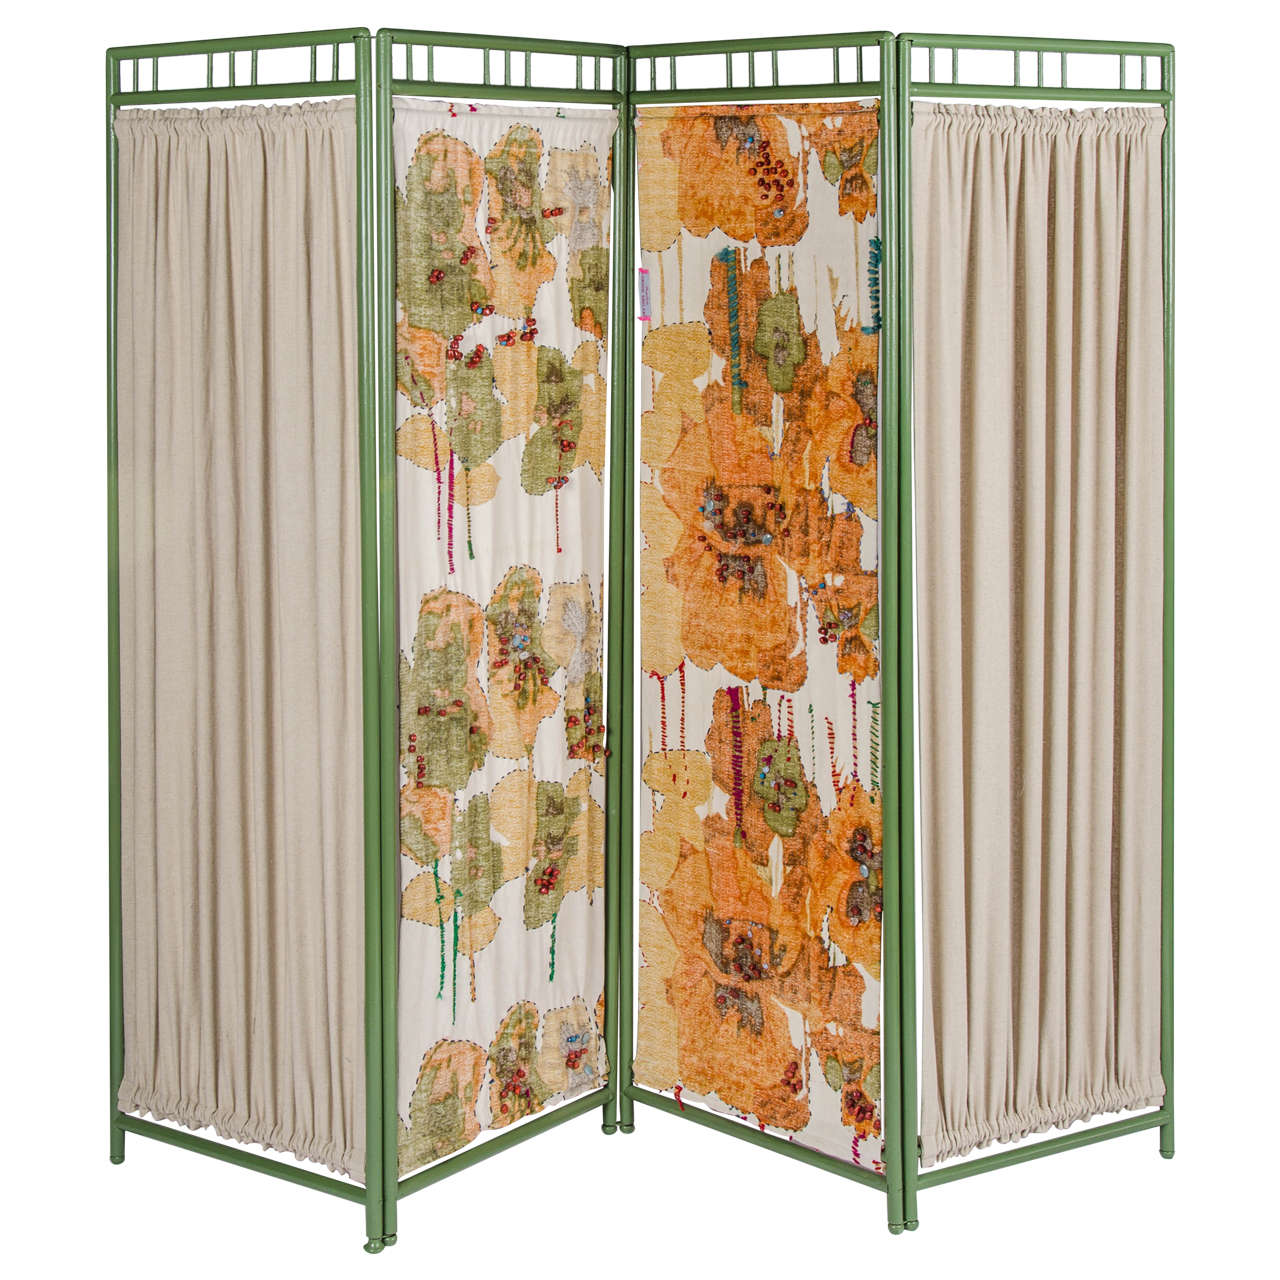 Early 20th Century Colourful Wooden Screen Room Divider 